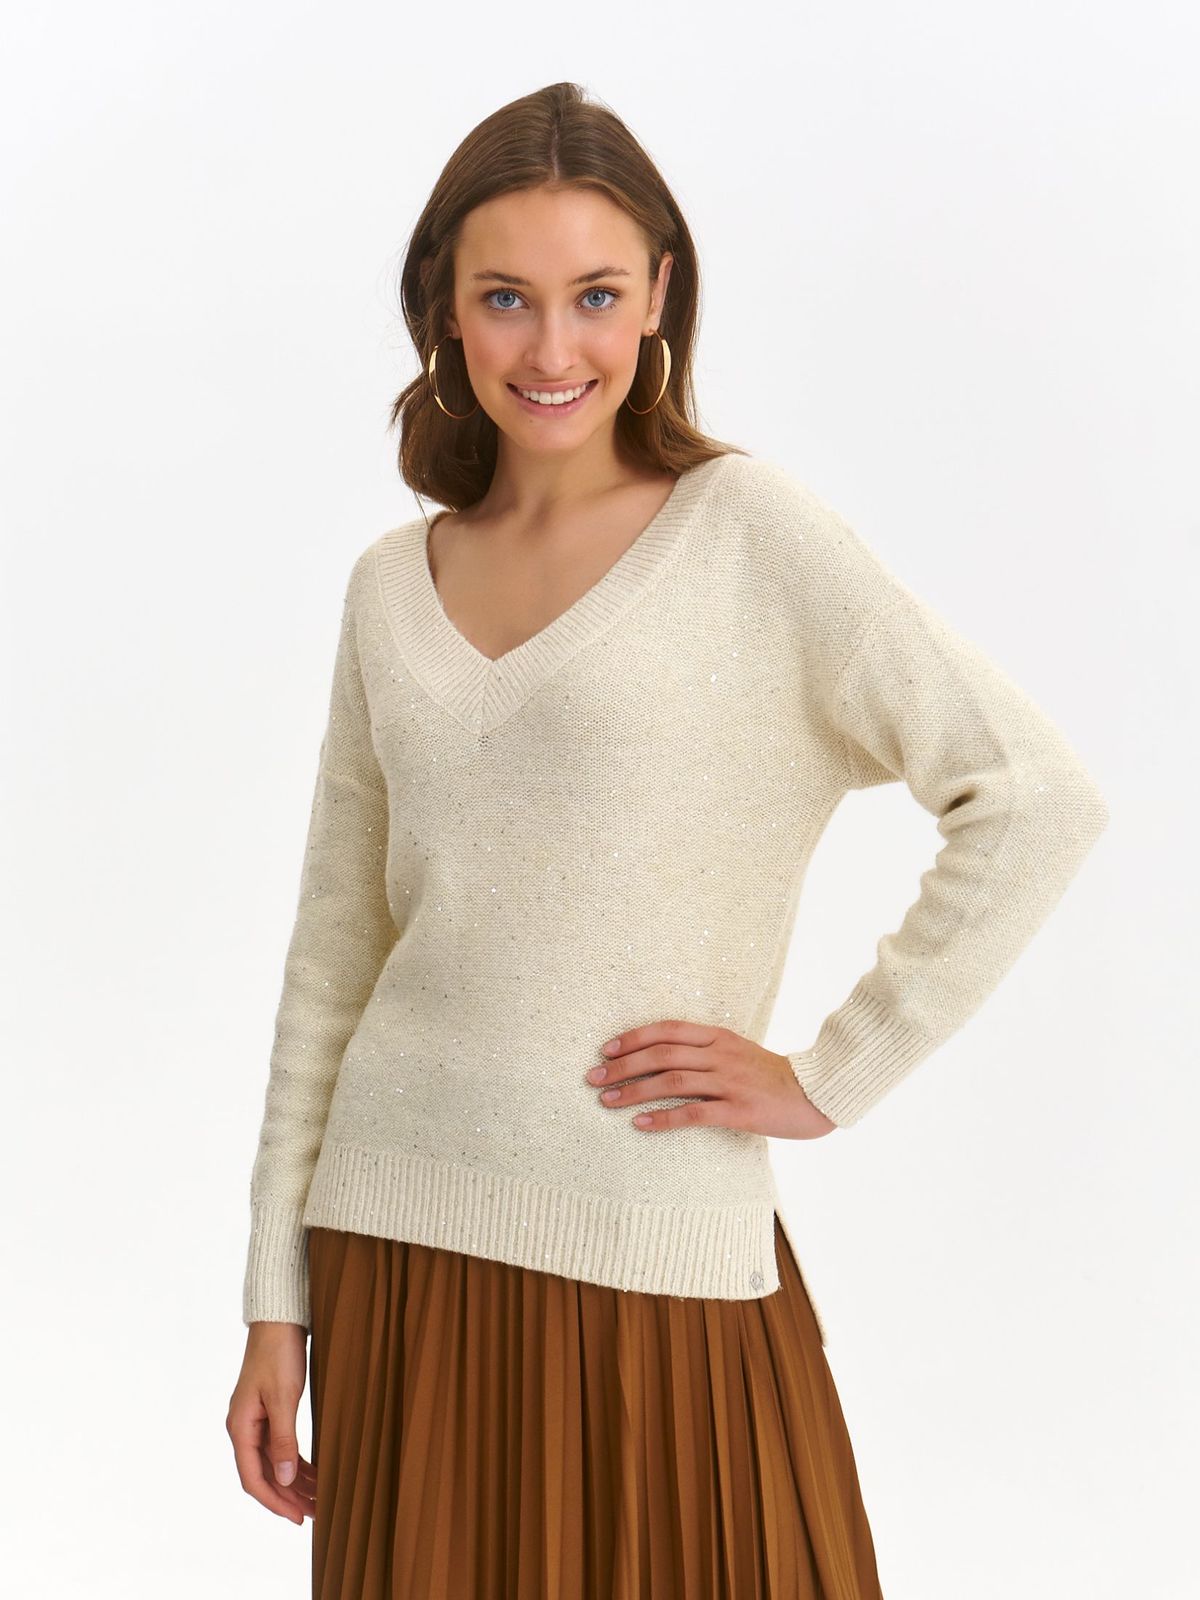 Beige sweater knitted loose fit with v-neckline with sequin embellished details